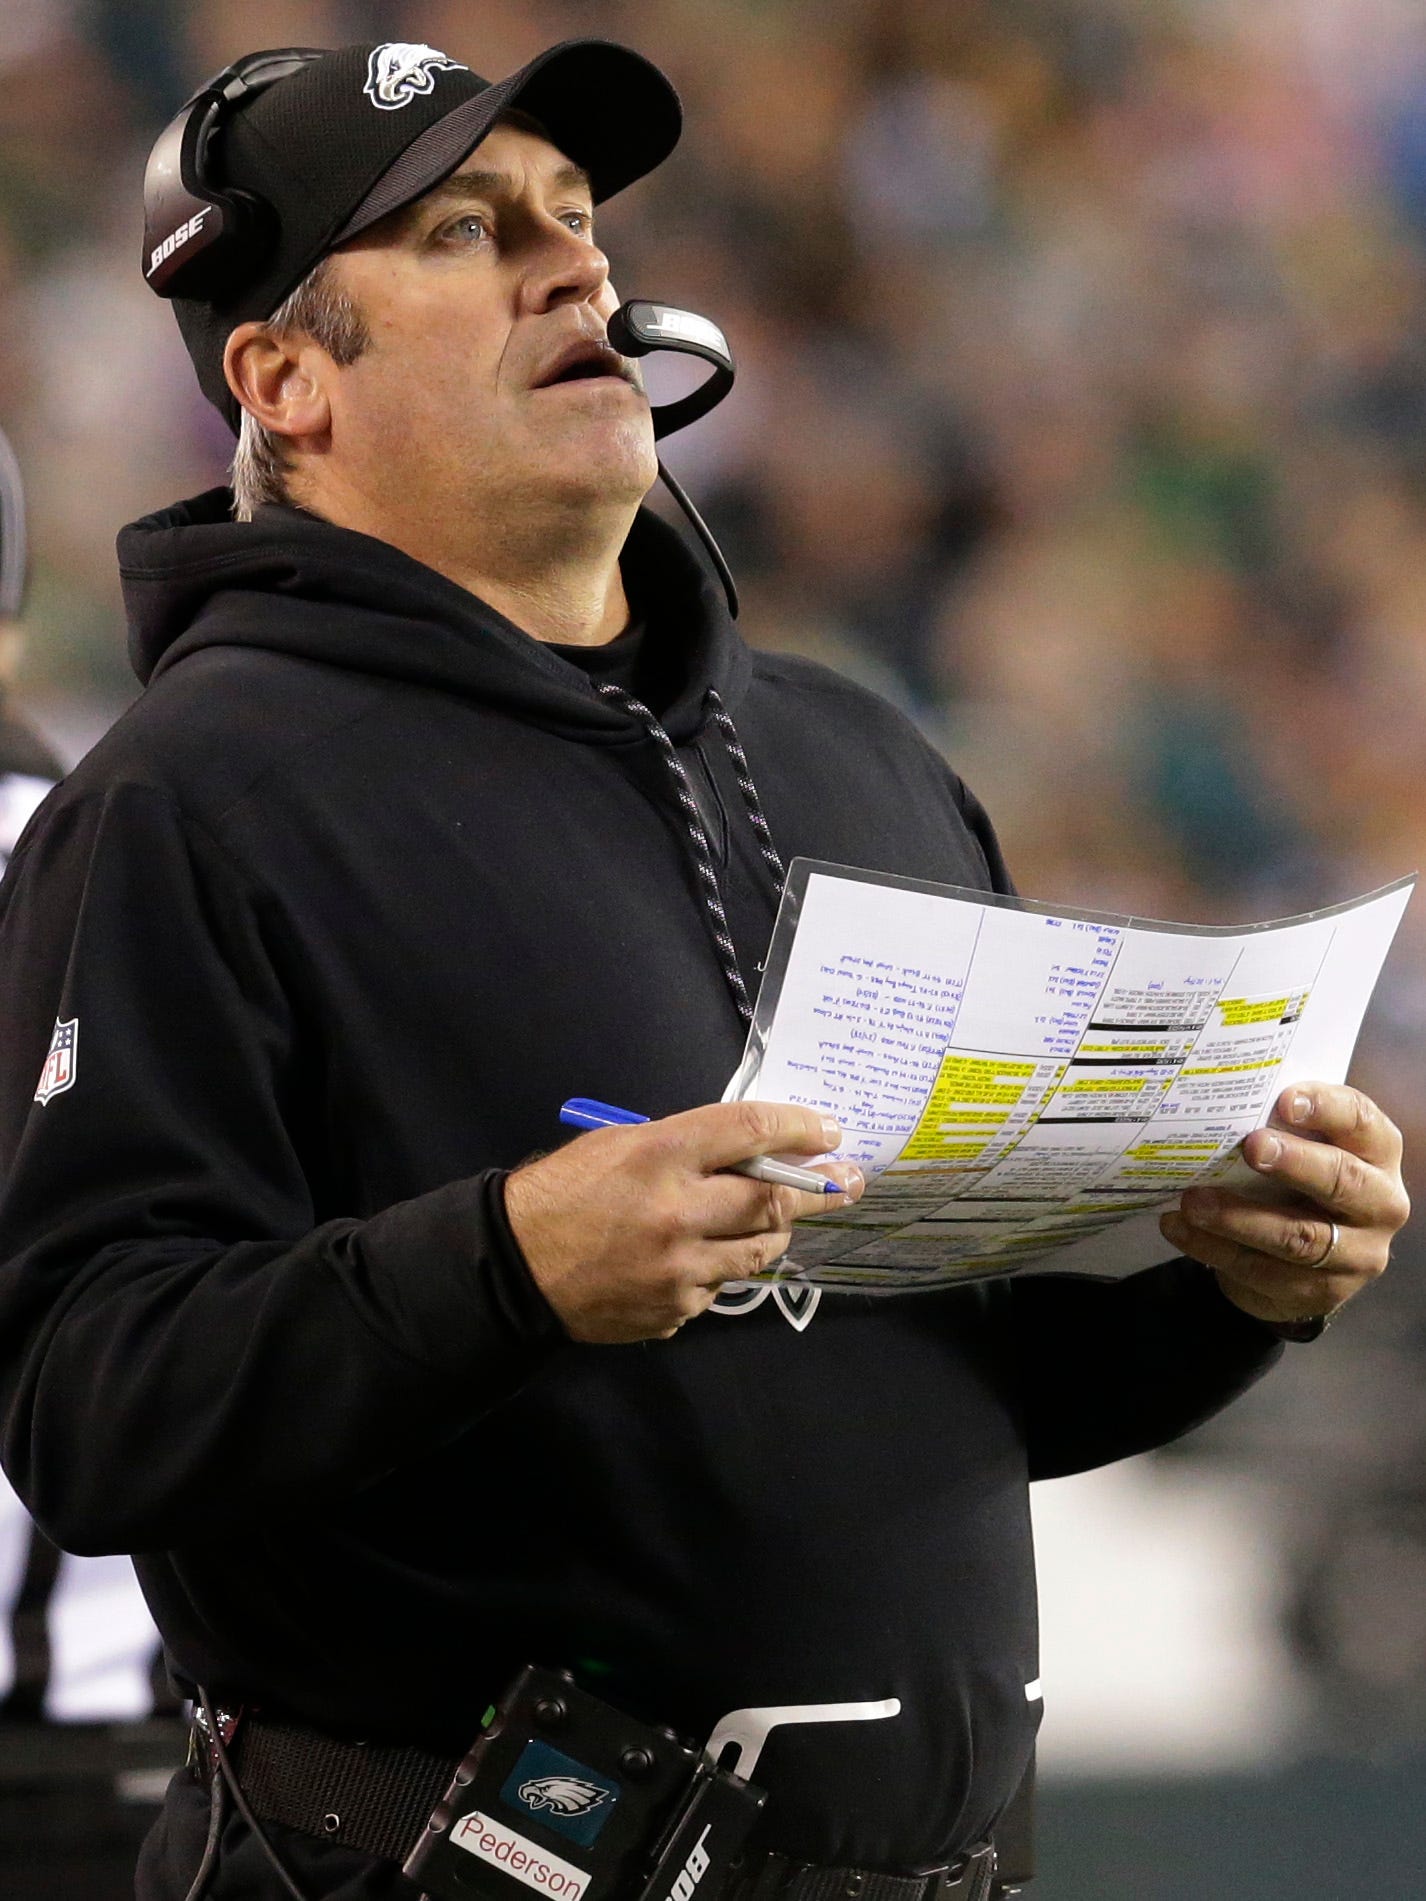 Philadelphia Eagle head coach Doug Peerson is shown during the second quarter of their game against the Green Bay Packers Monday, November 28, 2016 at Lincoln Financial Field in Philadelphia, Penn.